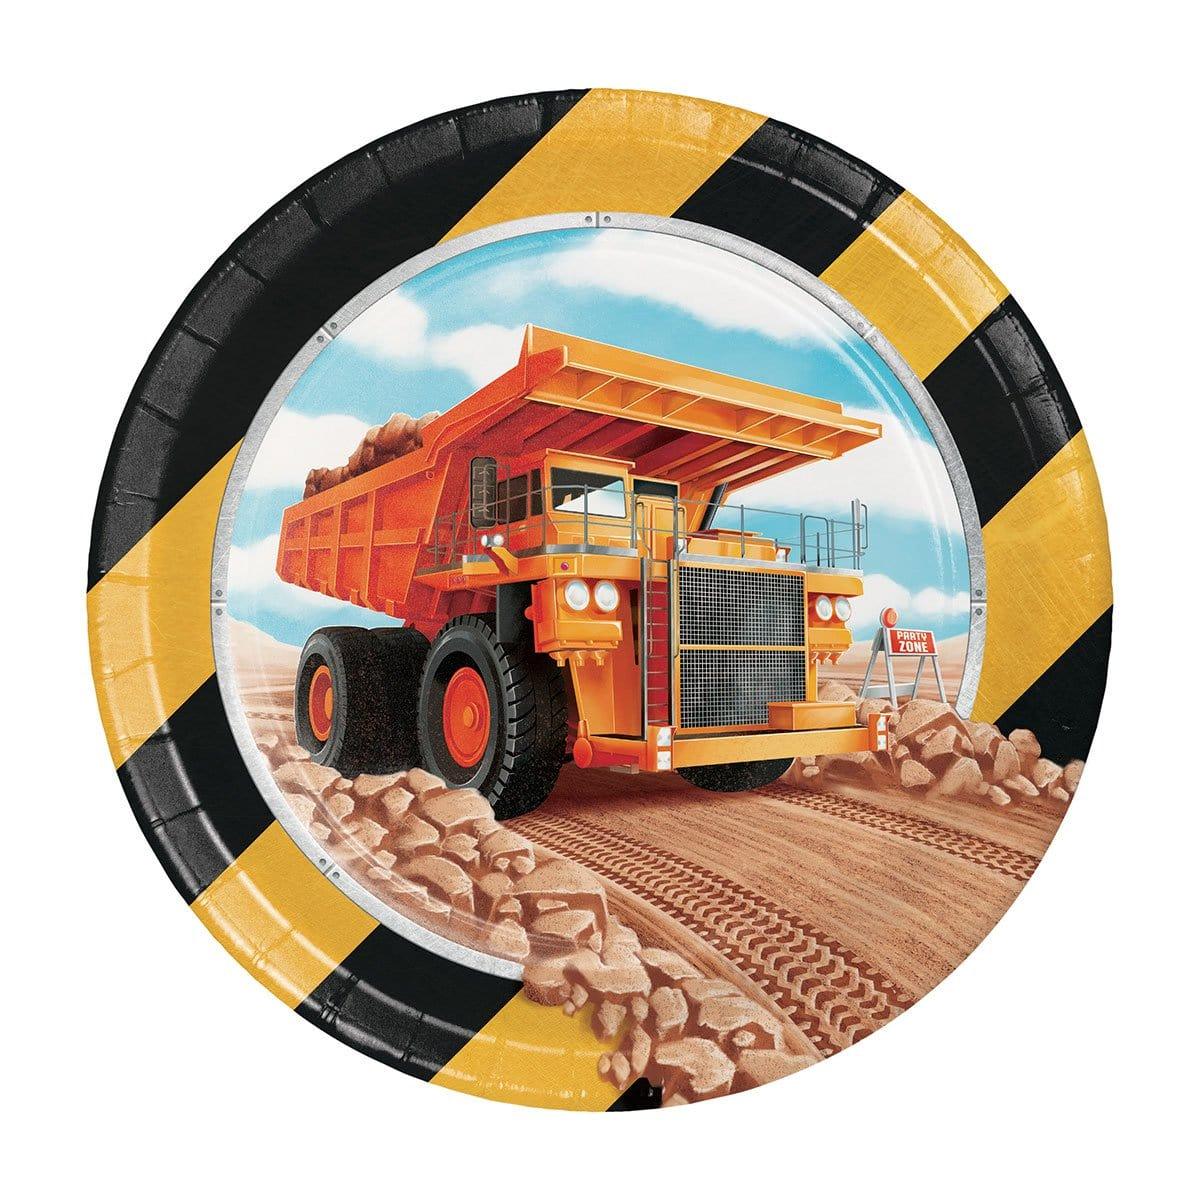 Buy Kids Birthday Big Dig Construction Dessert plates 7 inches, 8 per package sold at Party Expert